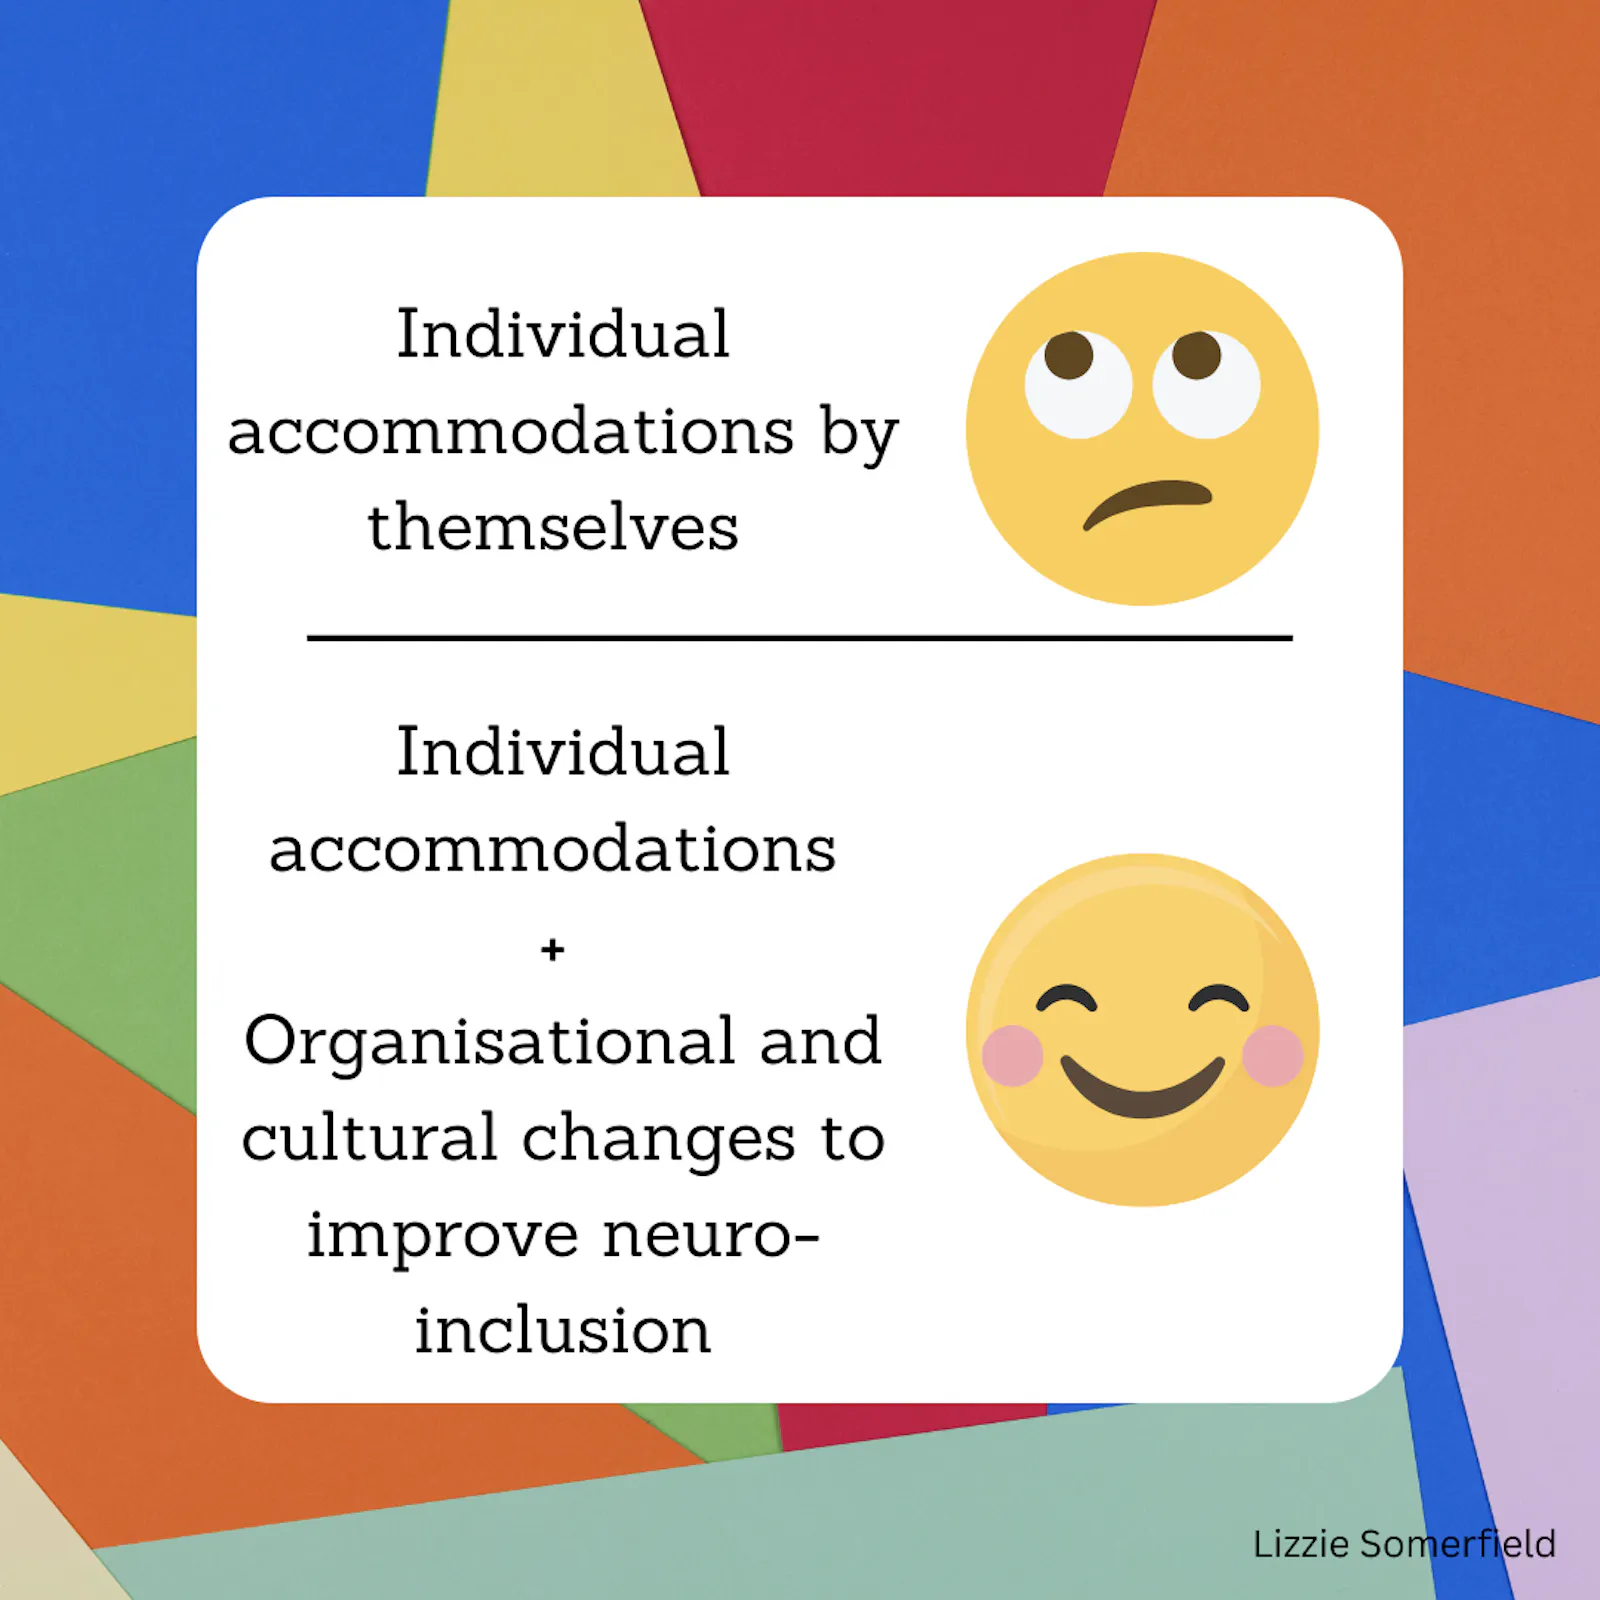 patterned background with a text box that reads: “Individual accommodations by themselves” (followed by a concerned looking emoji face) vs “Individual accommodations + organisational and cultural changes to improve neuro-inclusion (followed by a happy emoji face)